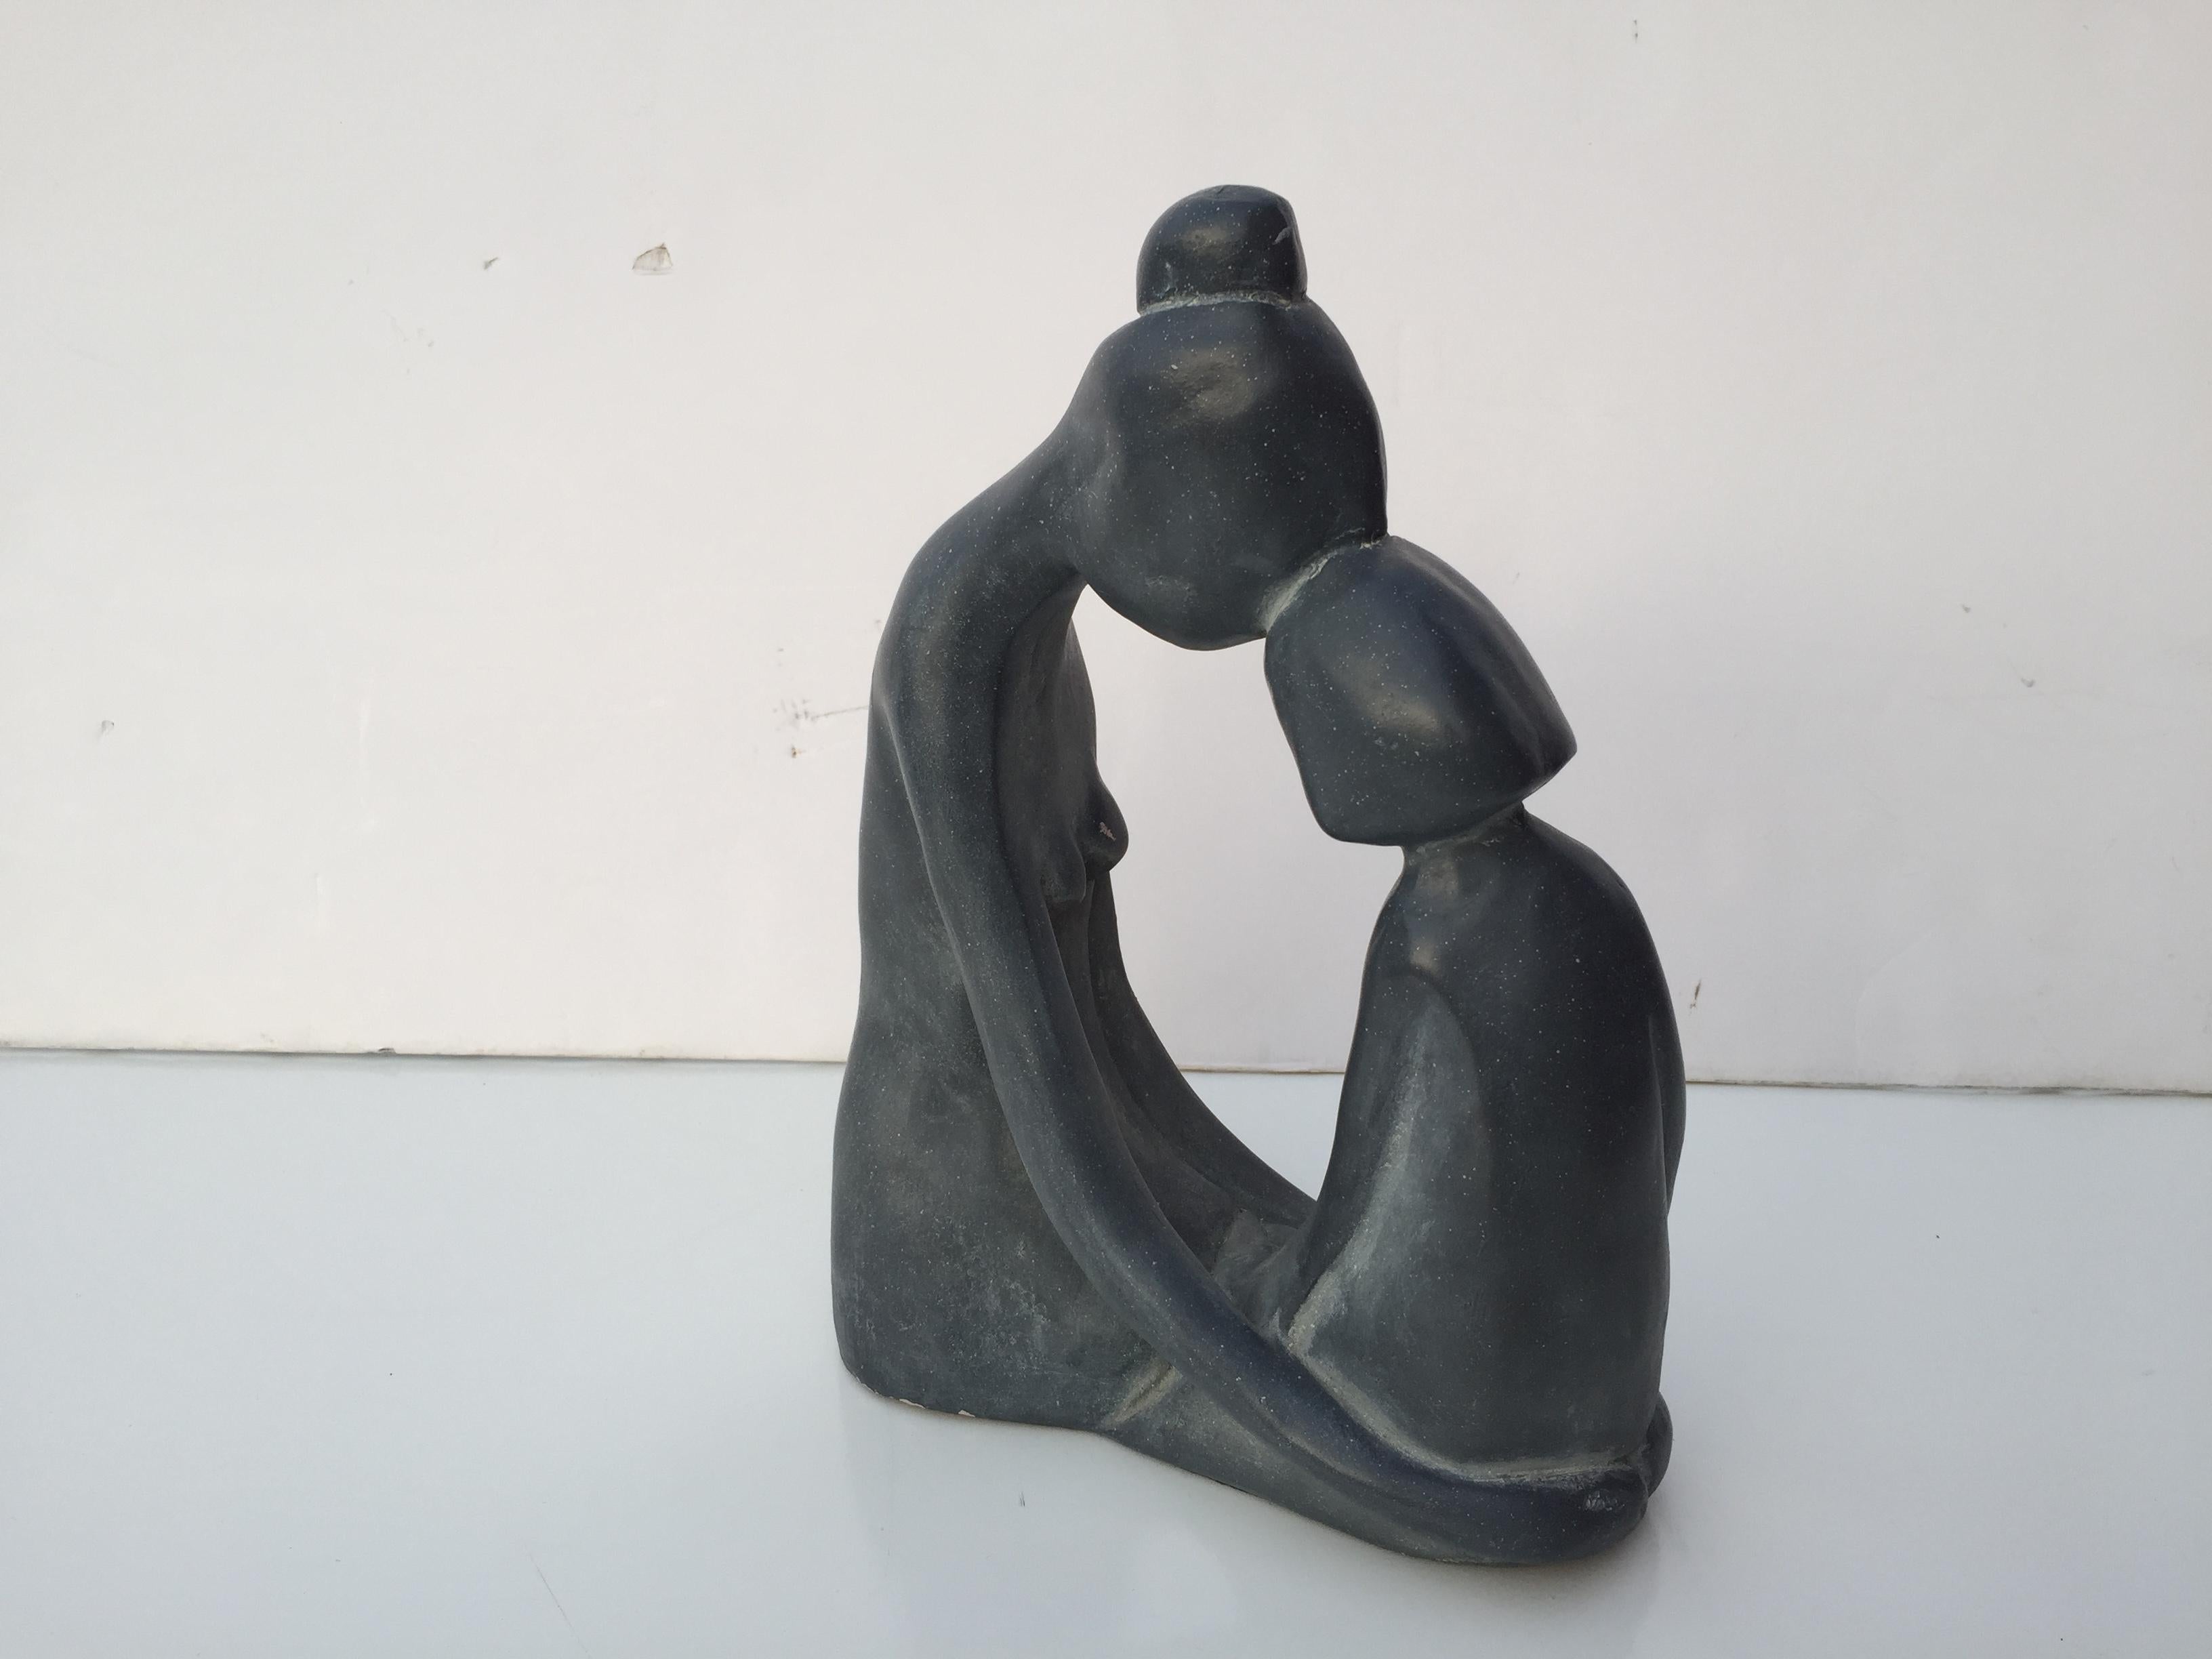 Small signed sculpture depicting mother and daughter duo  in poignant and graceful hold done in grayish blue.